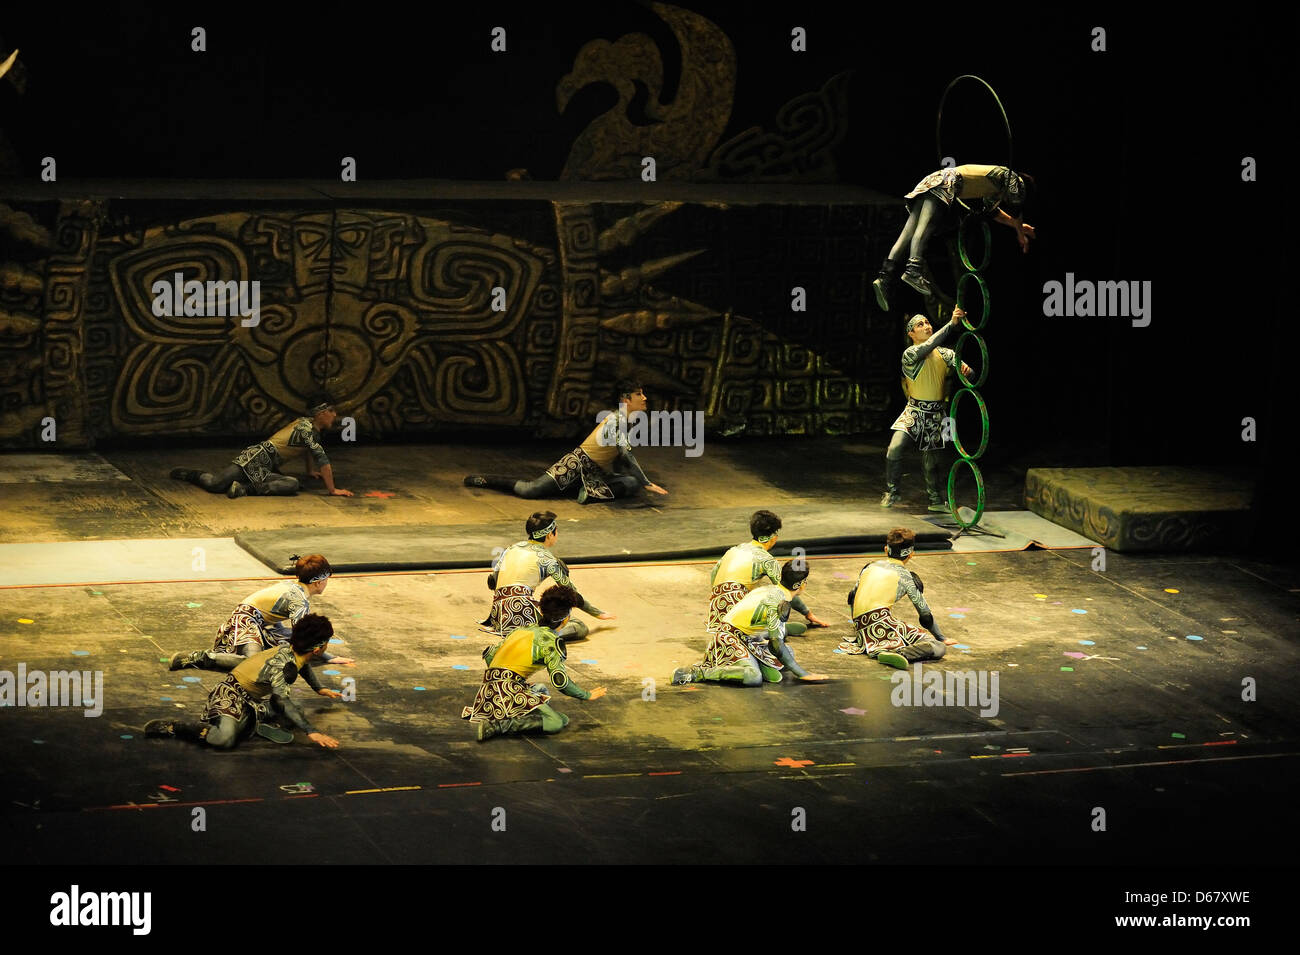 Beijing, China - April 1:A group of acrobat dancers perform during acrobatic show at Chaoyang Theater, Beijing on April 1, 2013. Stock Photo